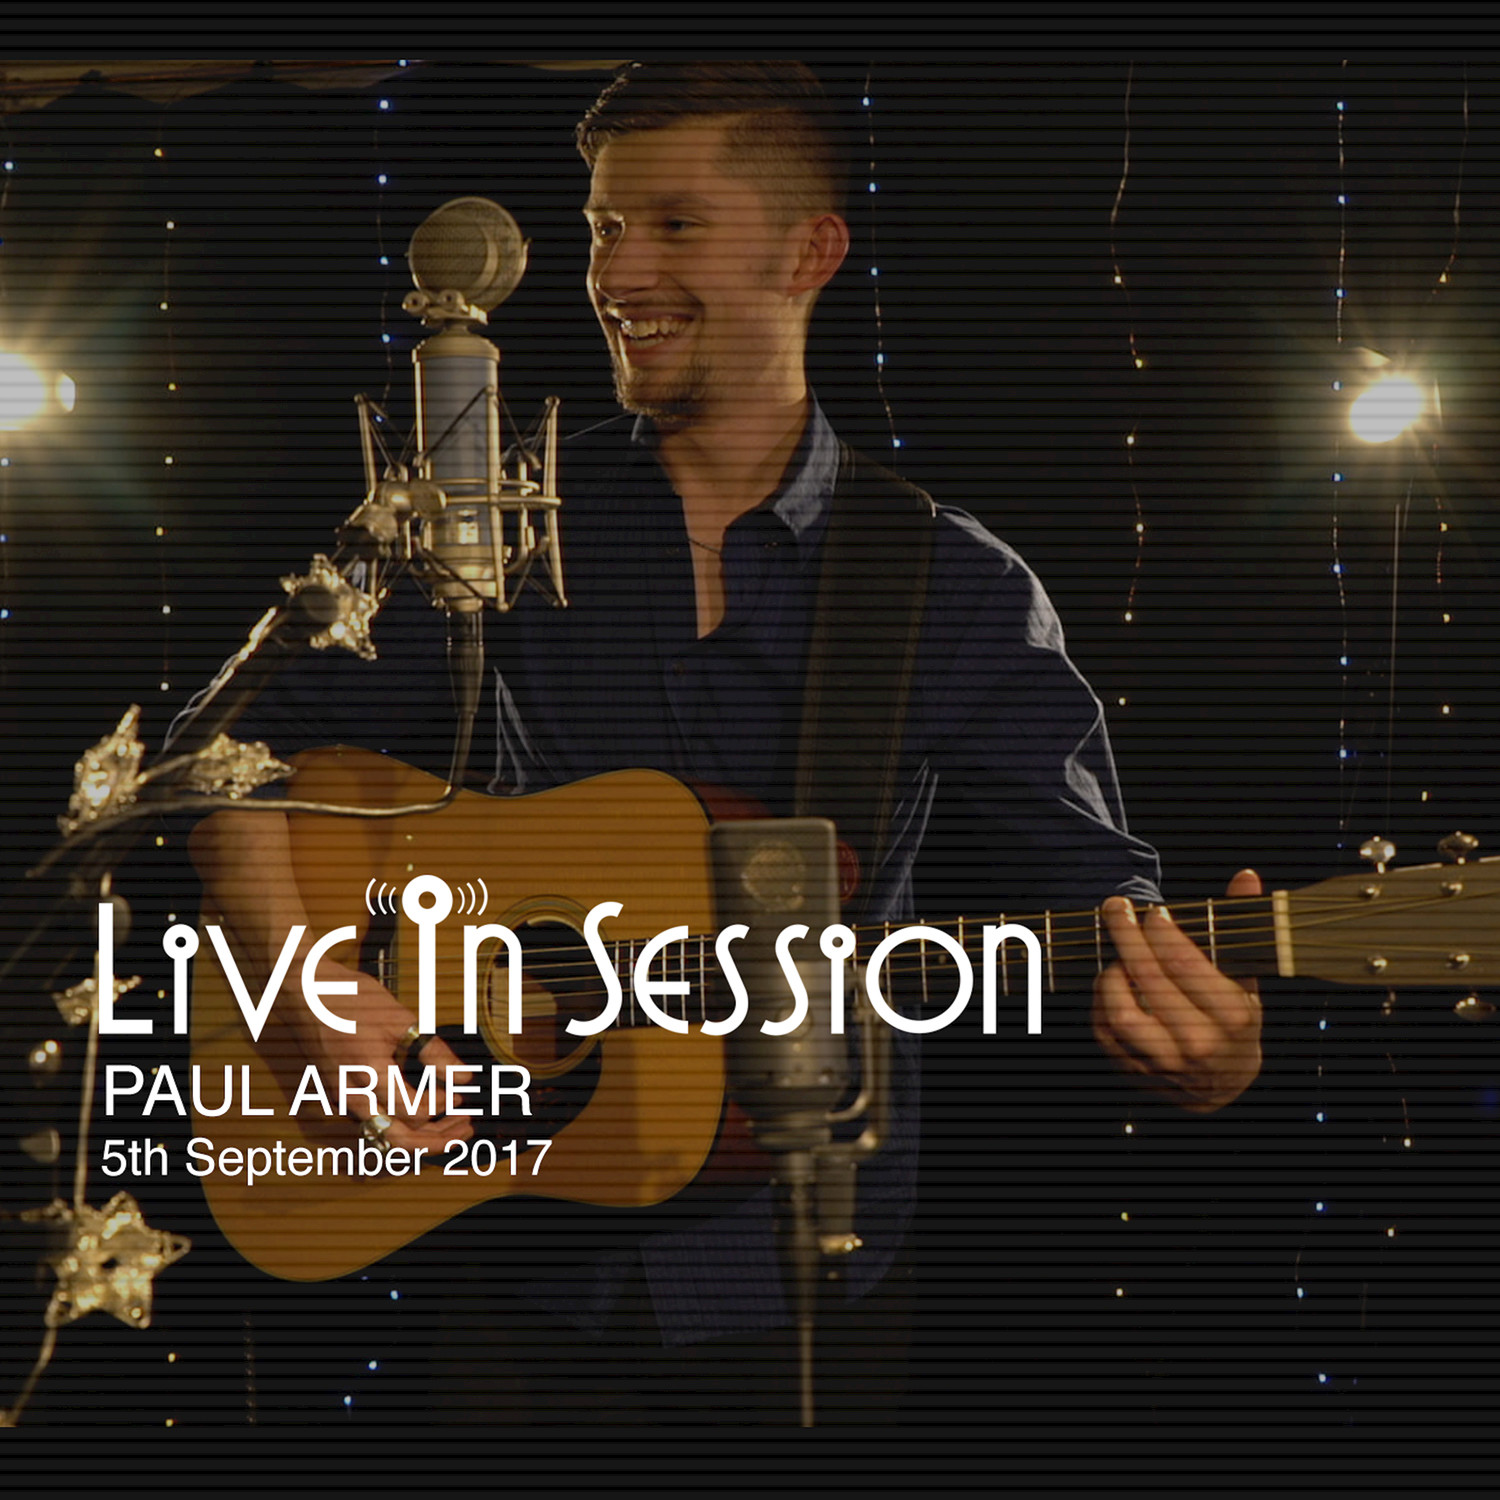 Live in Session with Paul Armer (5th September 2017)